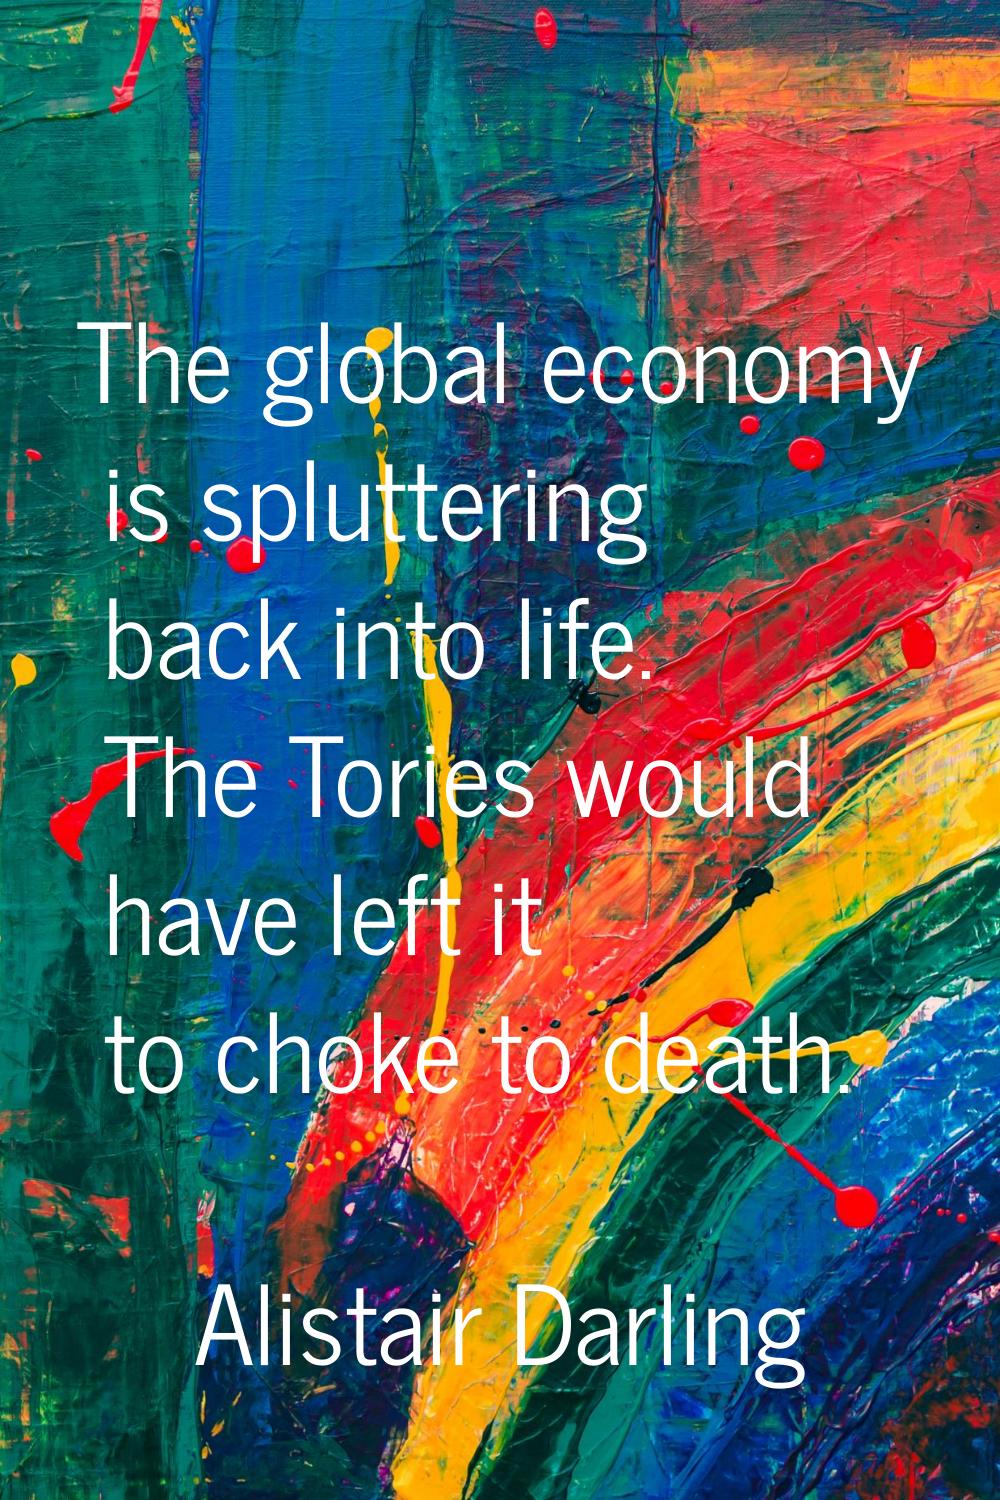 The global economy is spluttering back into life. The Tories would have left it to choke to death.